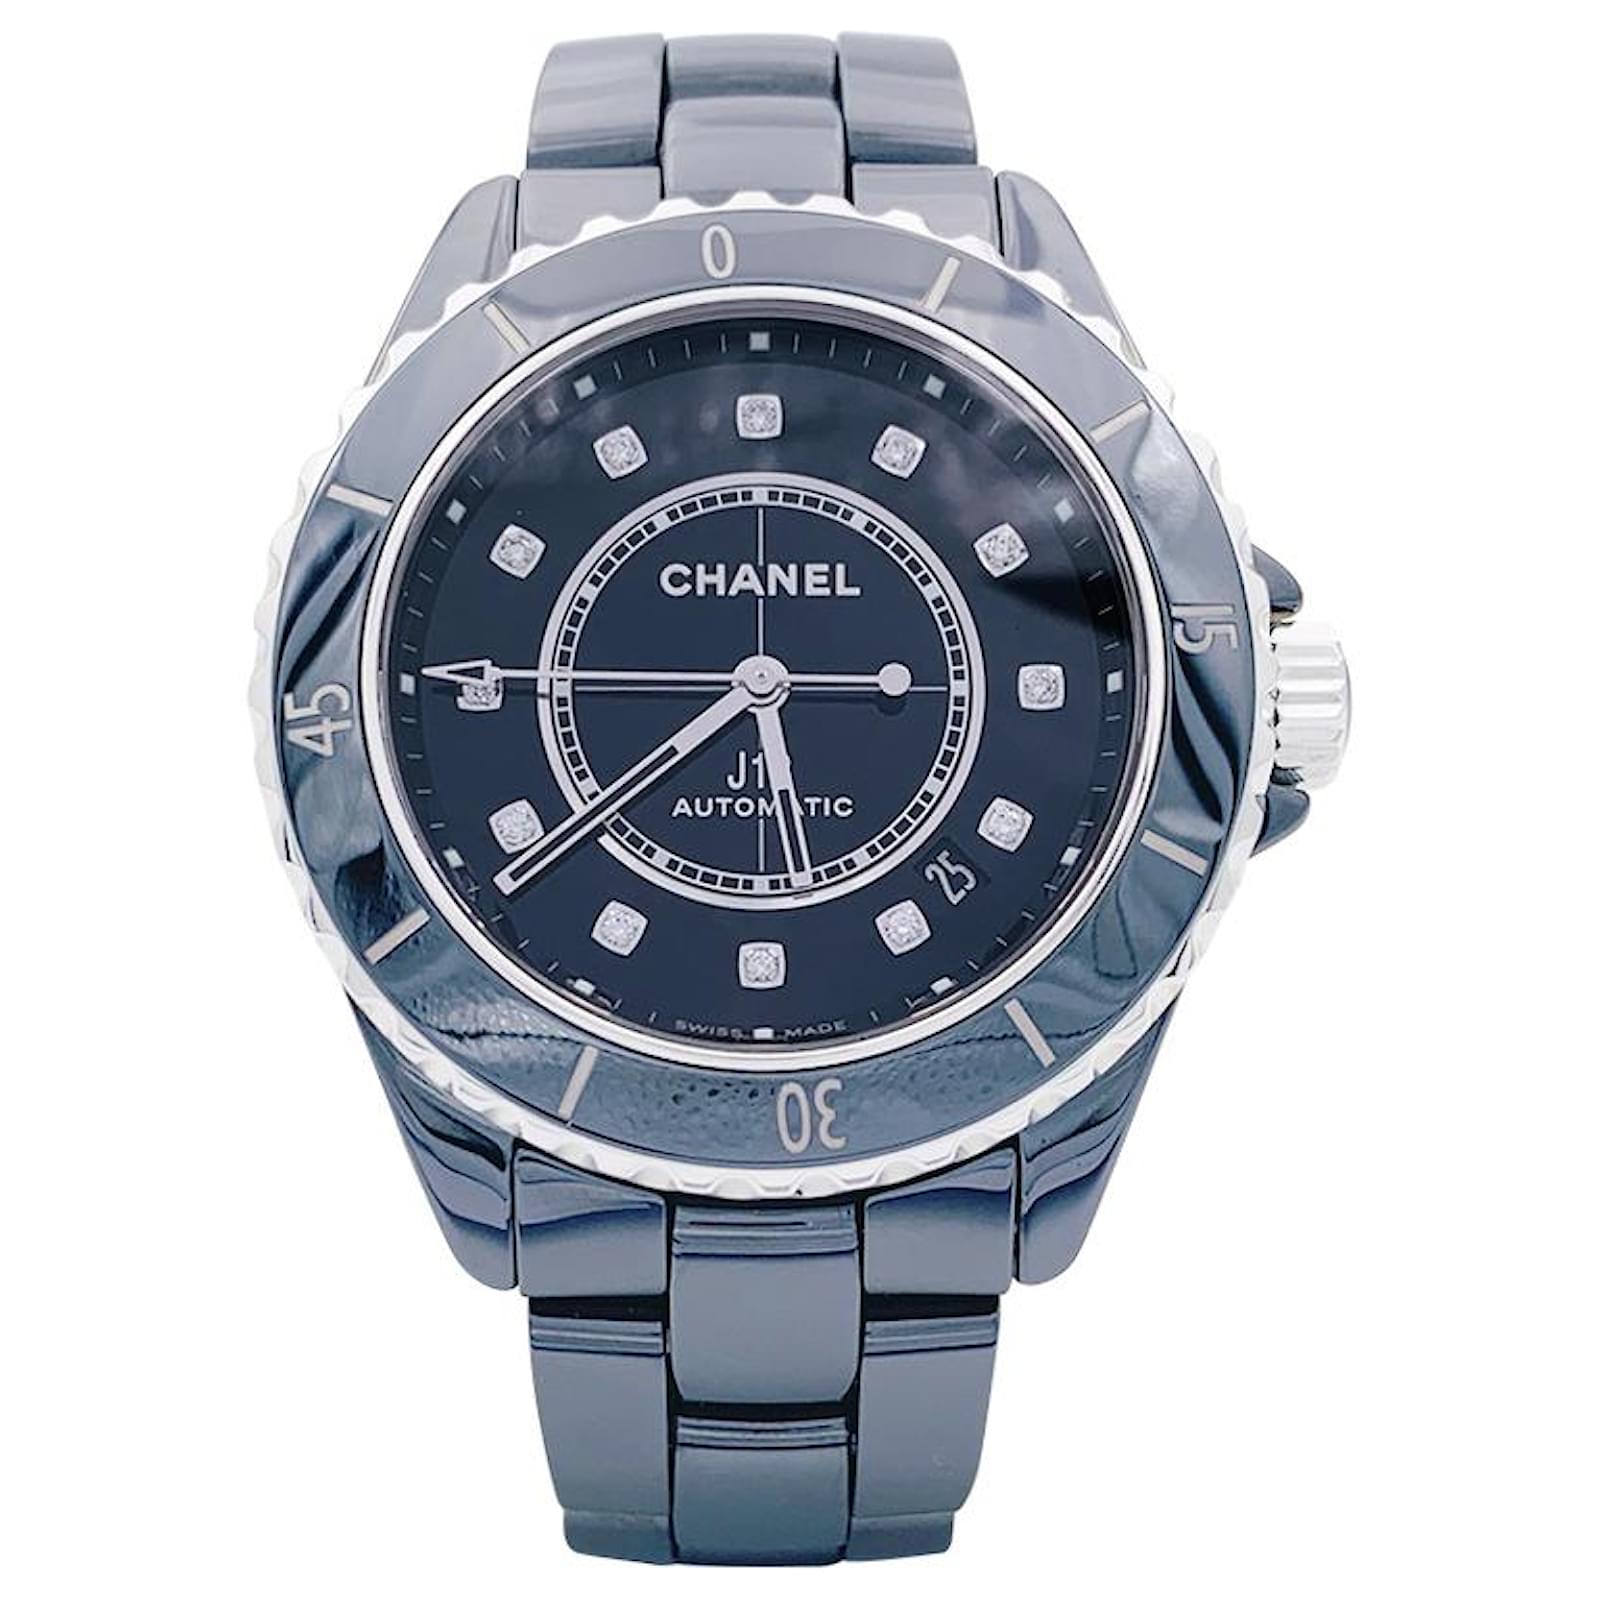 Chanel J12 for $9,791 for sale from a Trusted Seller on Chrono24